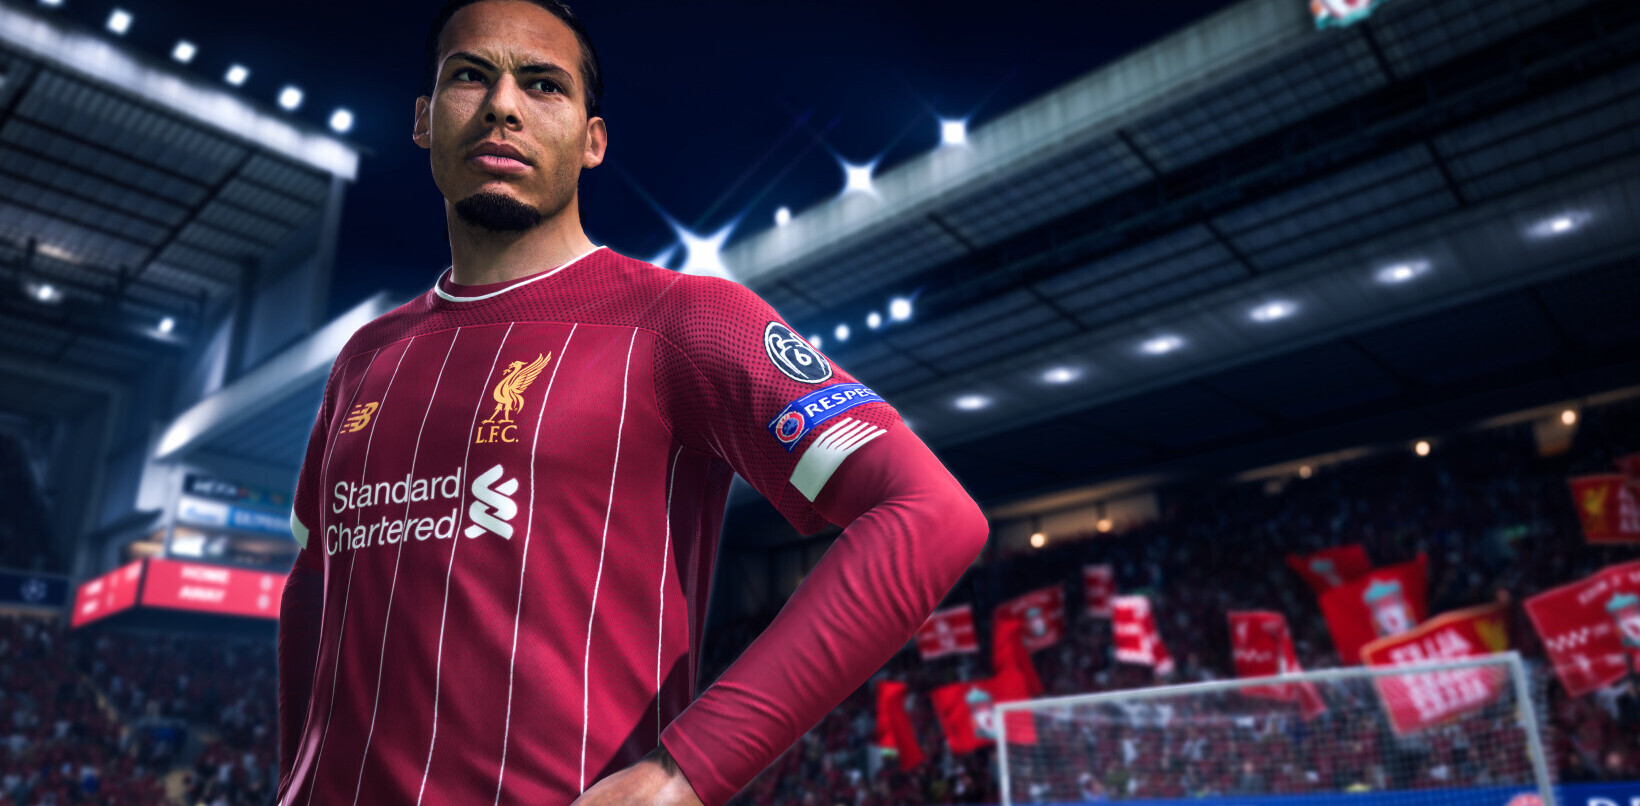 English Premier League reveals the soccer stars competing in FIFA 20 tournament